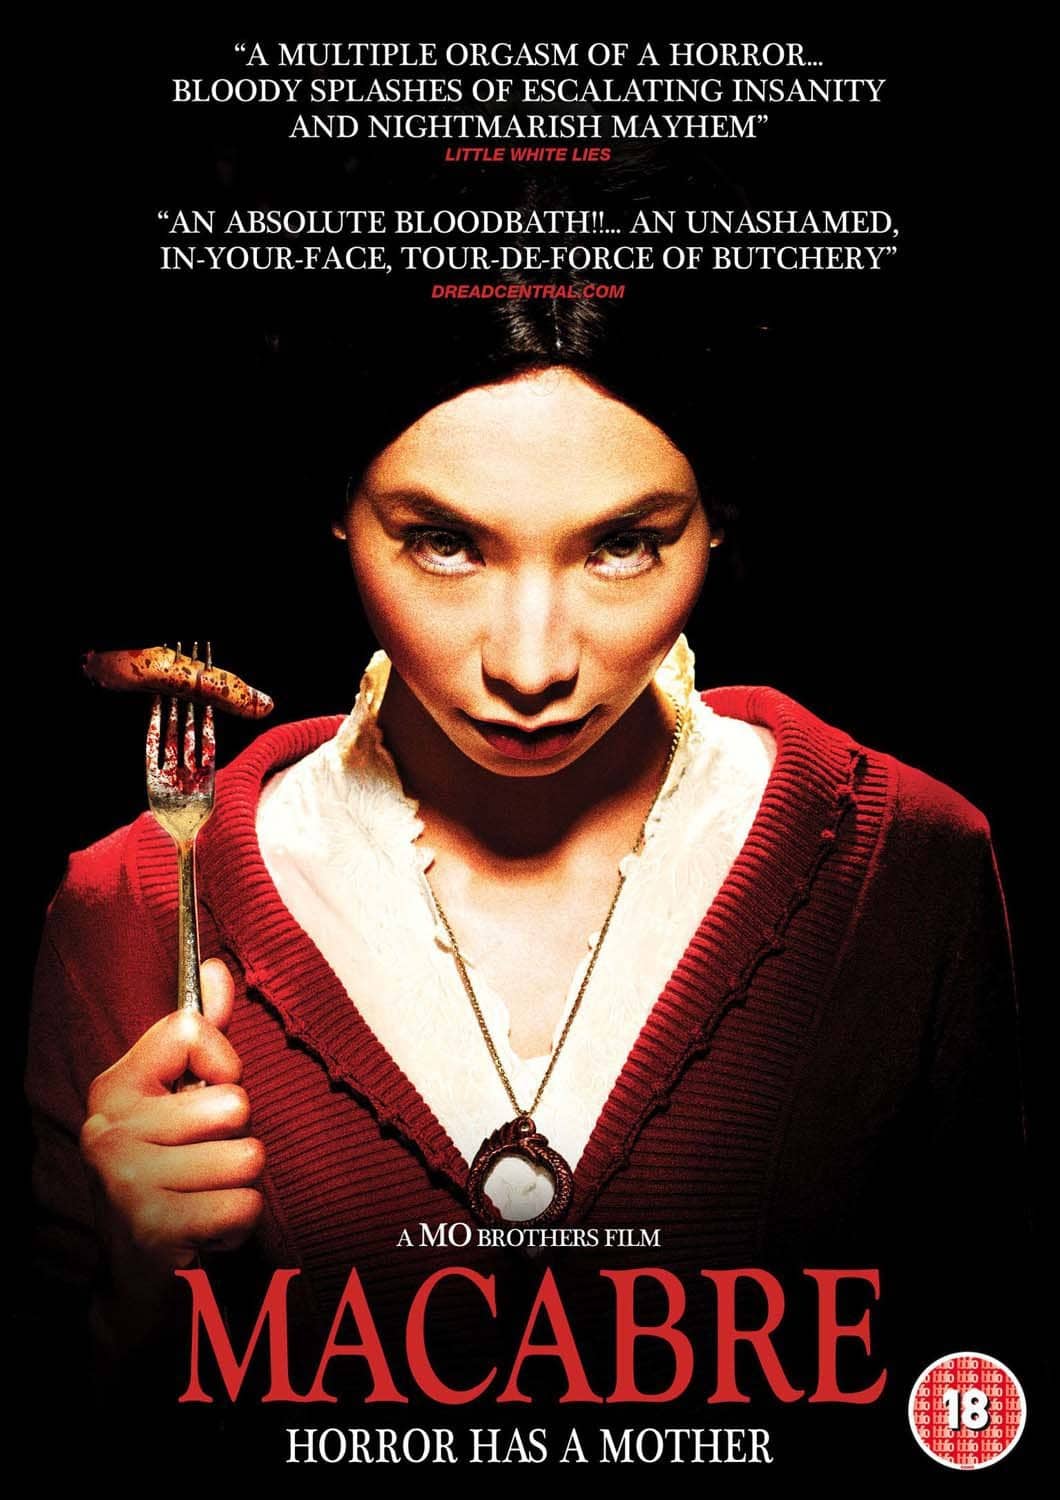 Film Review: Macabre (2009) by the Mo Brothers